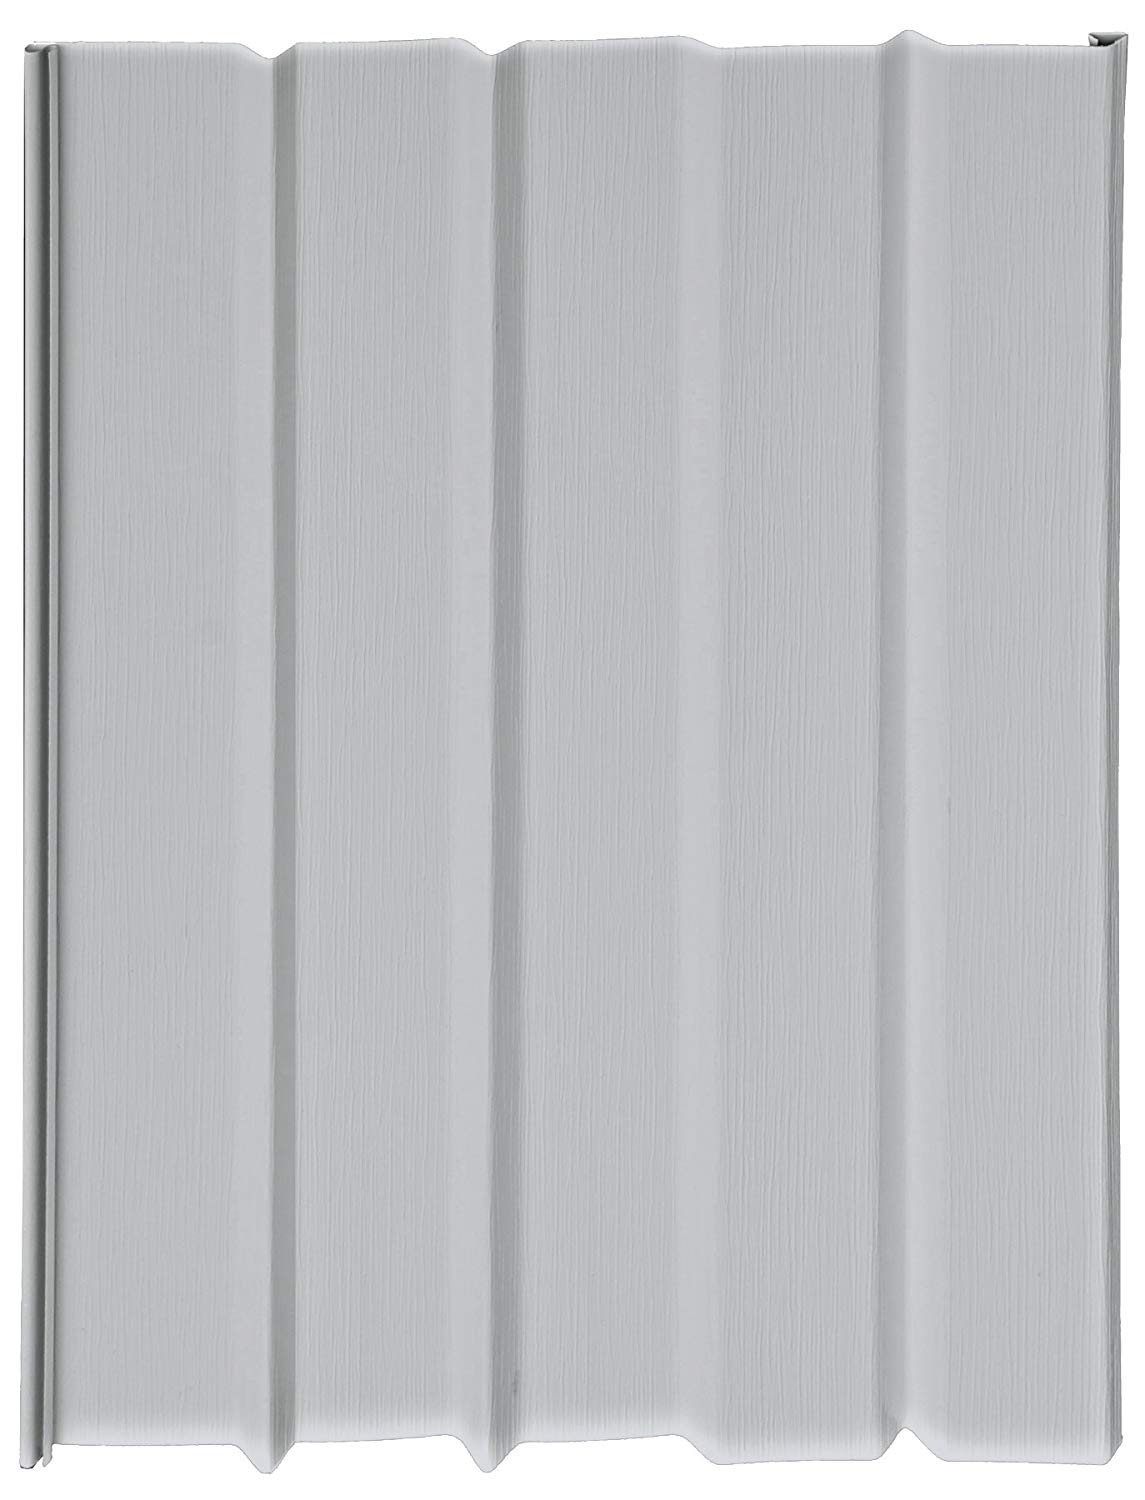 Mobile Home Skirting Vinyl Underpinning Panel Grey 16" W x 35" L (Pack of 10) - image 1 of 2